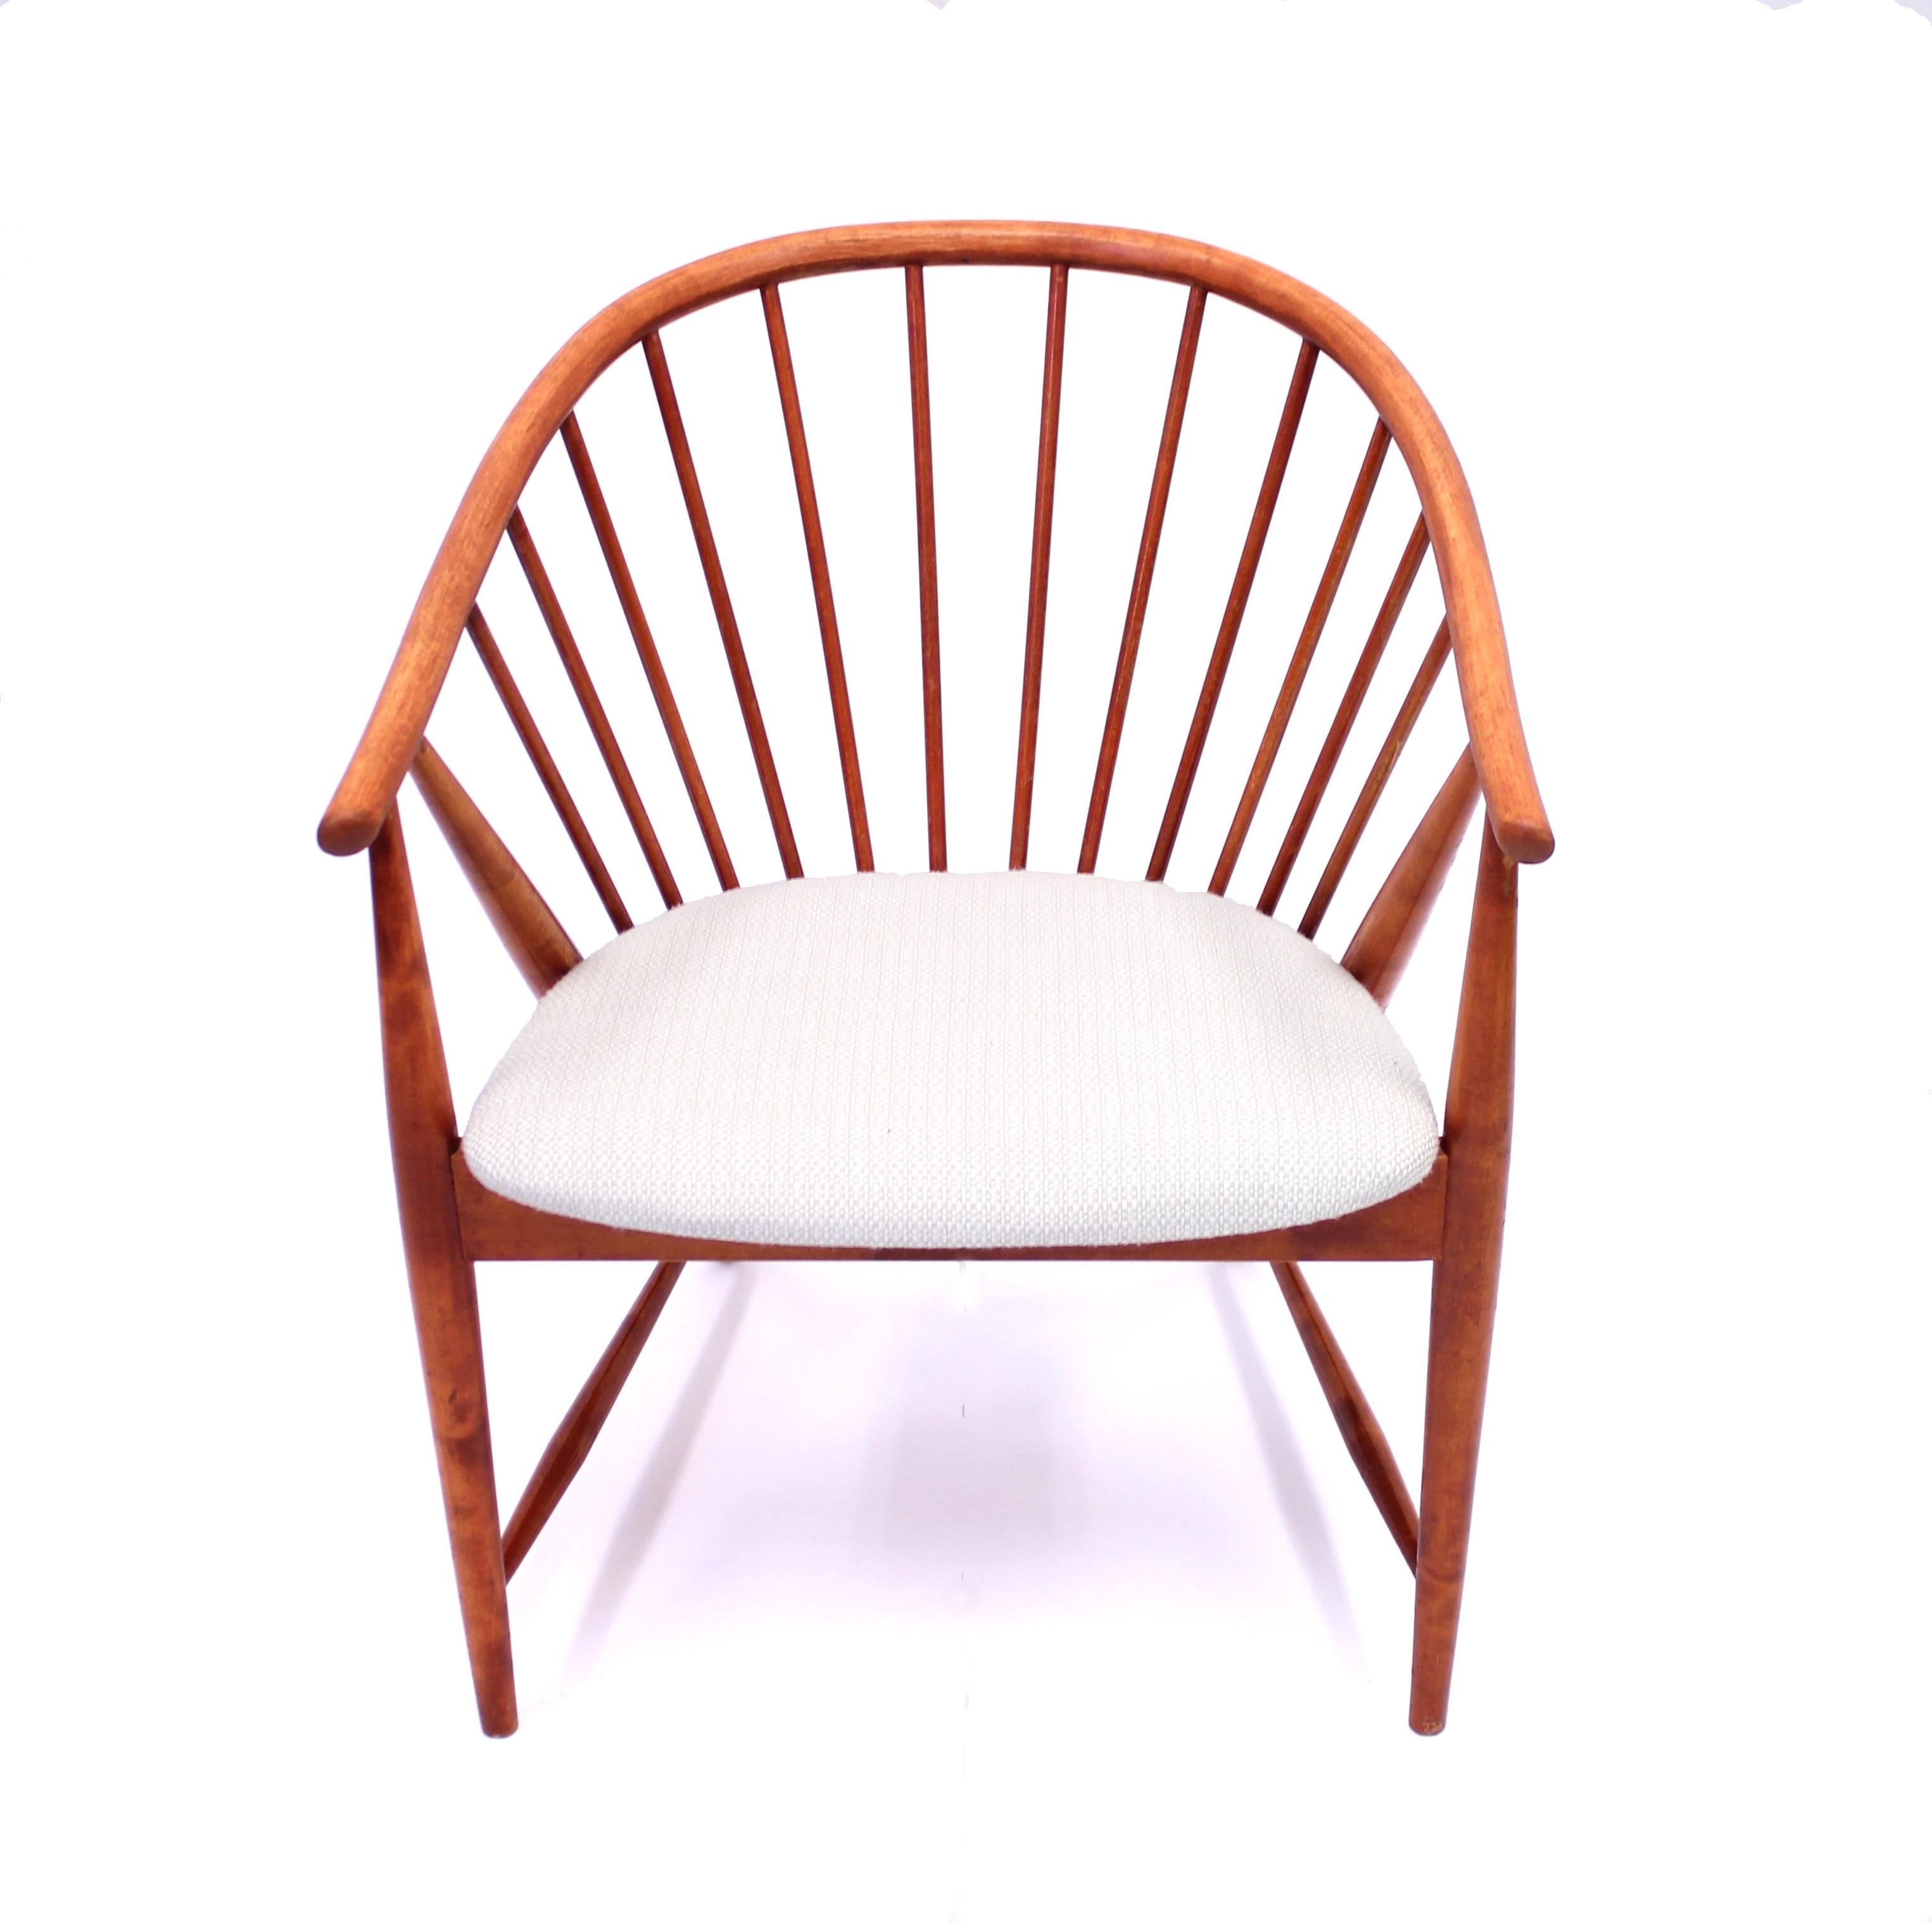 Sonna Rosén, Solfjädern (meaning Sun feather) armchair in red/orange stained birch made by Swedish manufacturer Nässjö Stolfabrik (also called NESTO), 1950s. Newly upholstered seat with white/beige fabric. The round bar backrest has been restored